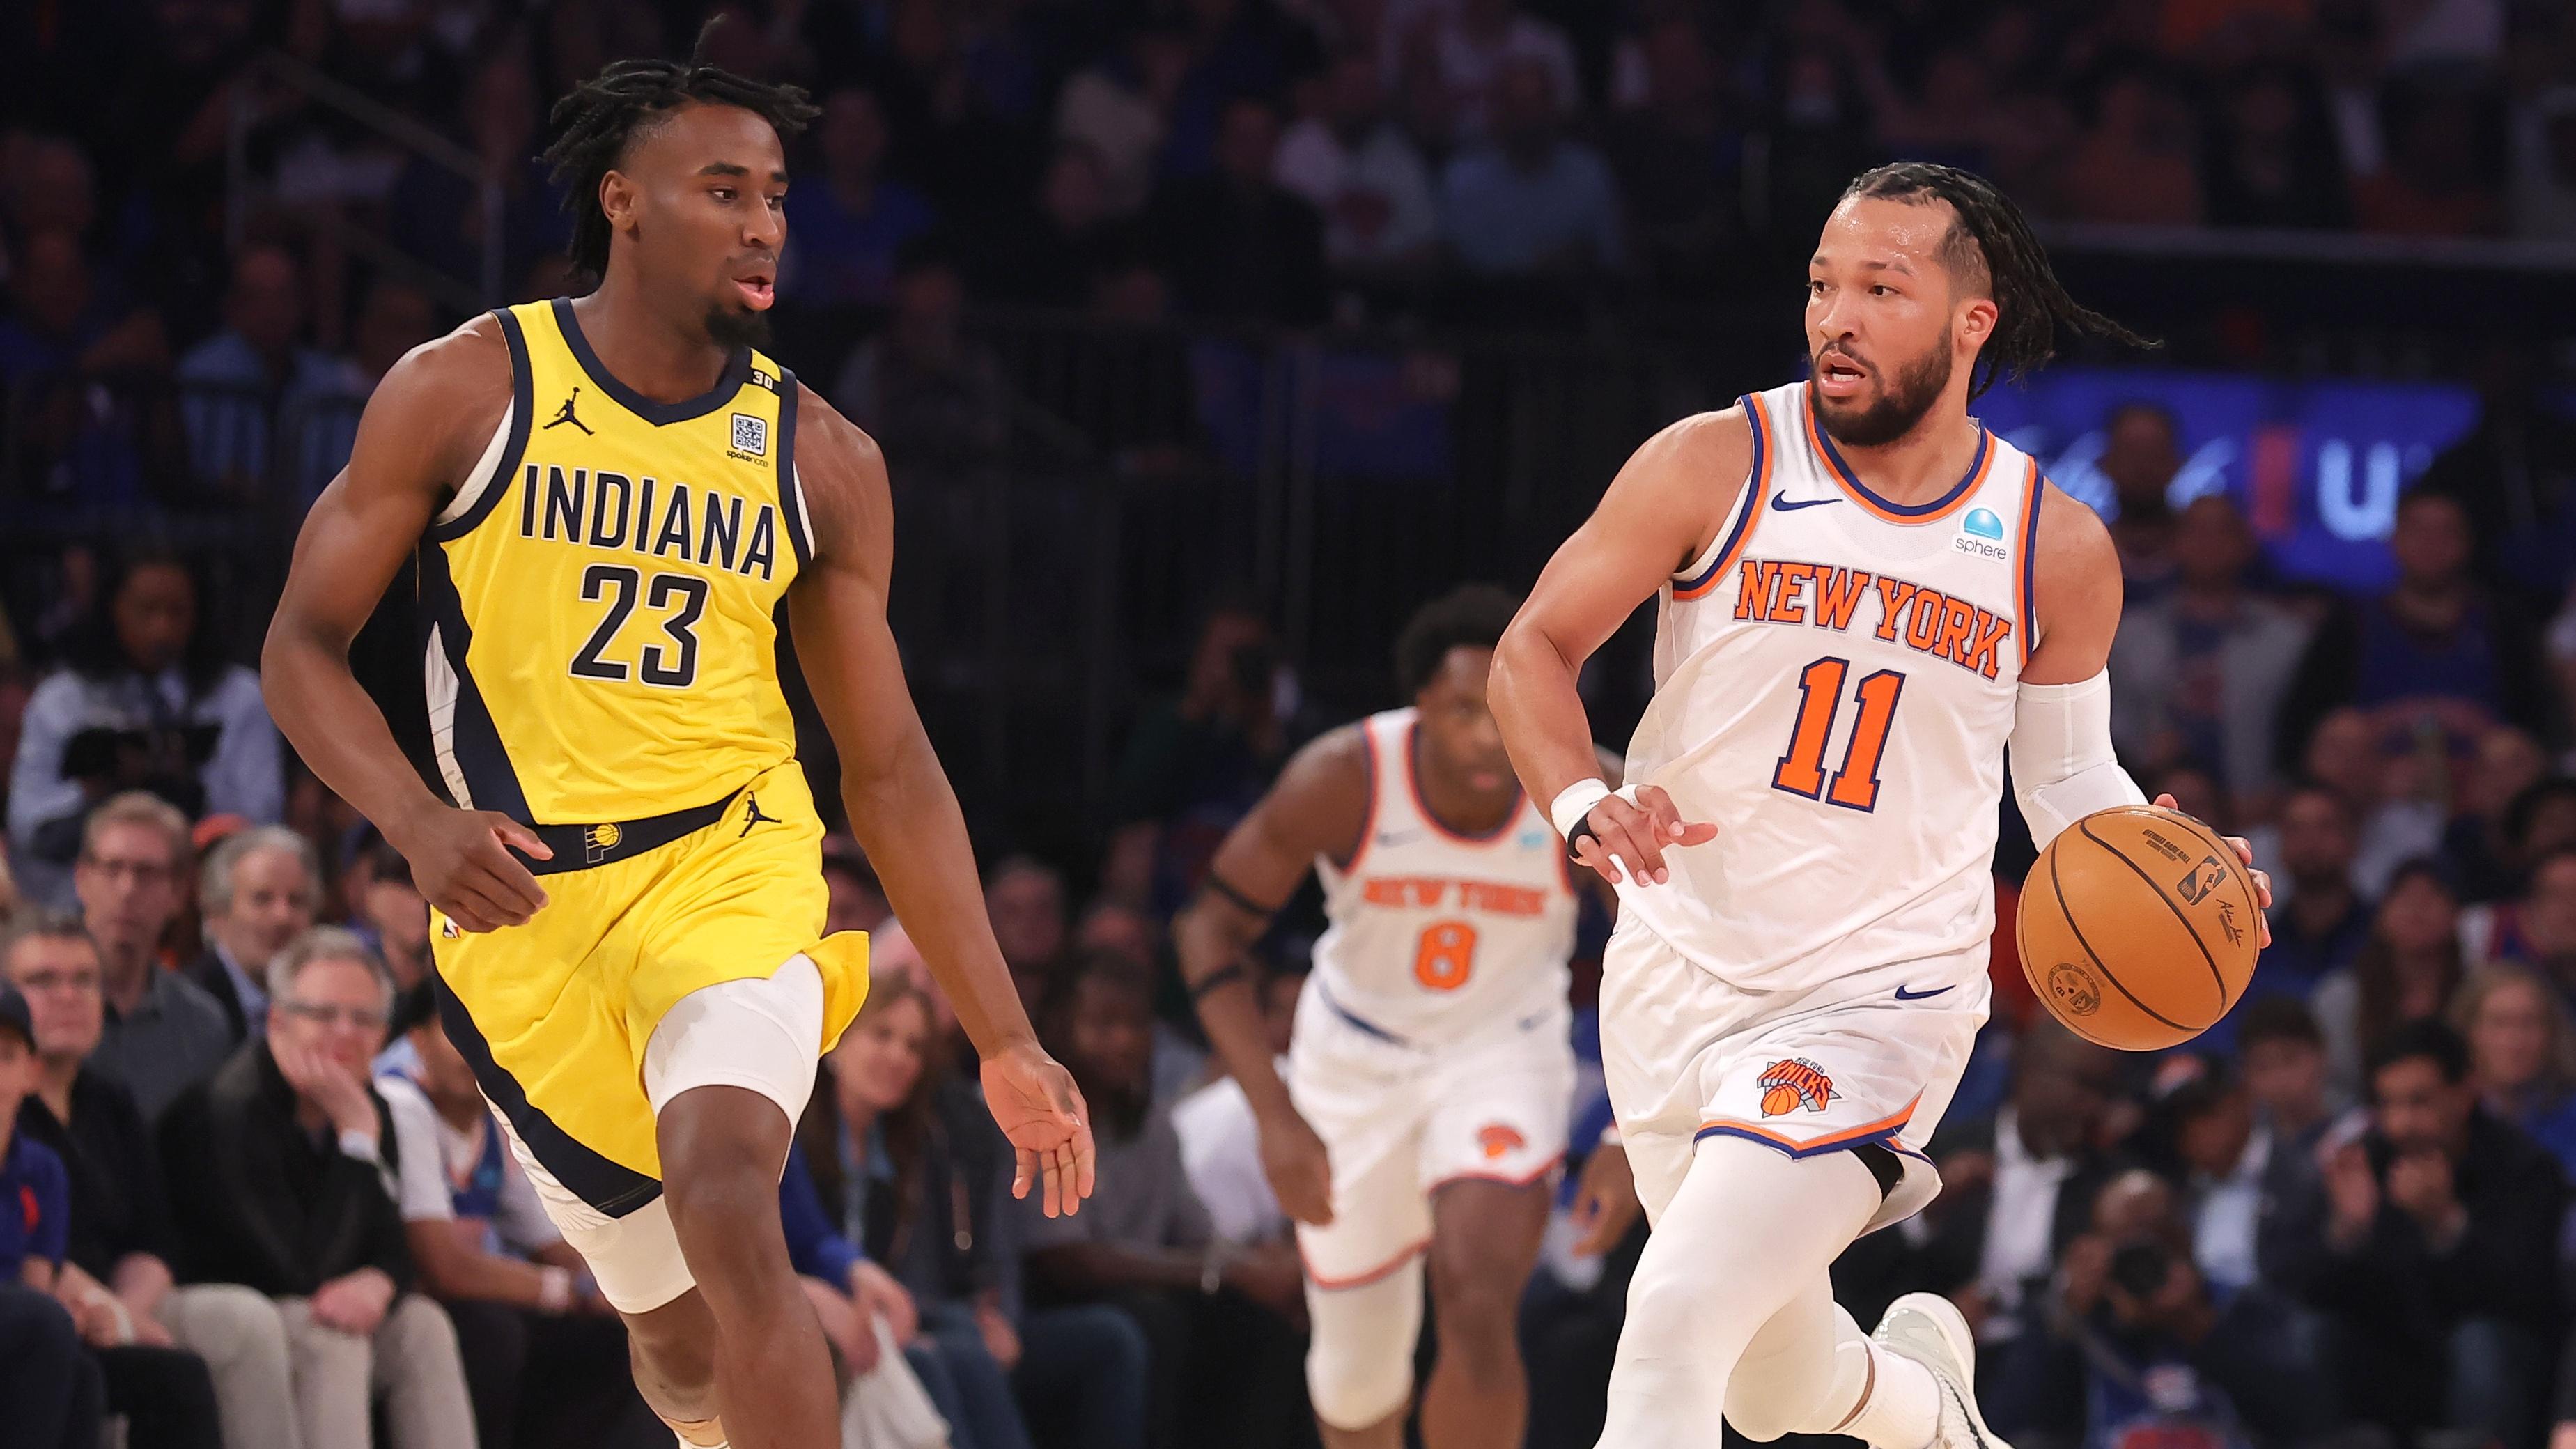 New York Knicks guard Jalen Brunson (11) brings the ball up court against Indiana Pacers forward Aaron Nesmith (23) during the first quarter of game one of the second round of the 2024 NBA playoffs at Madison Square Garden / Brad Penner - USA TODAY Sports